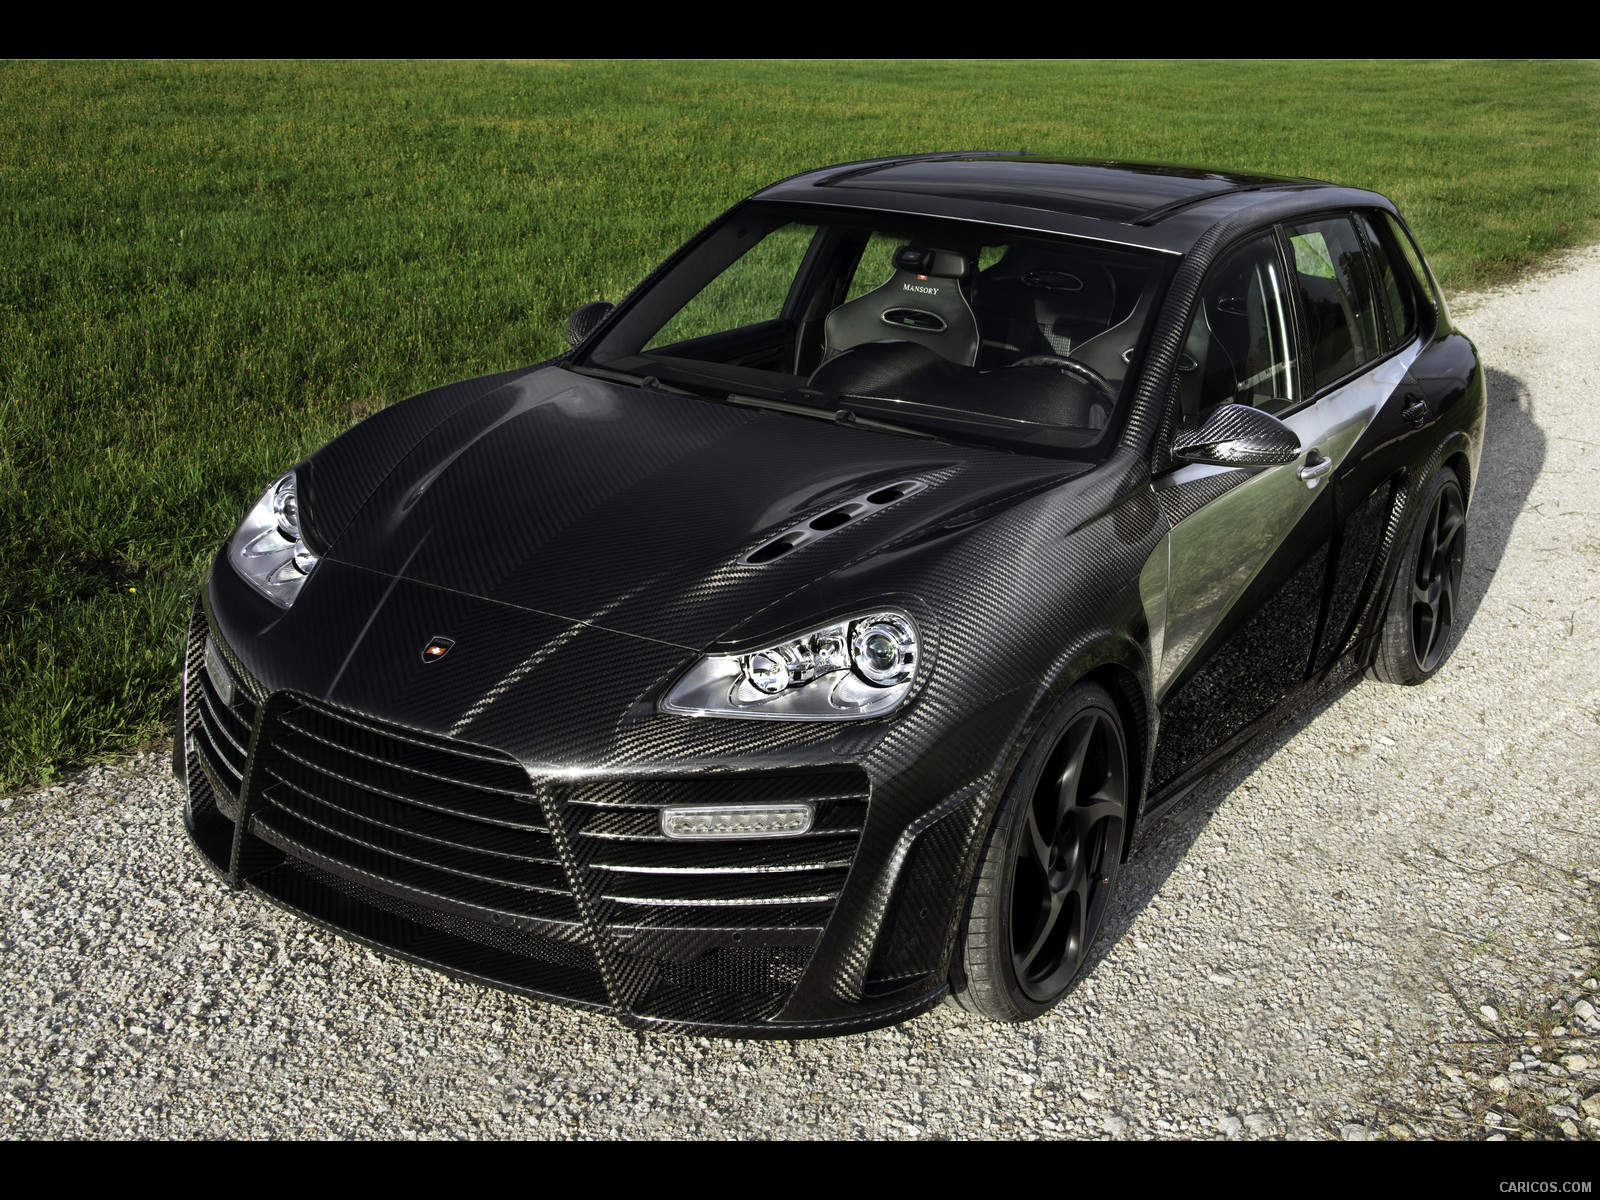 2009 Mansory Chopster based on Porsche Cayenne Turbo S  - Front, #6 of 38